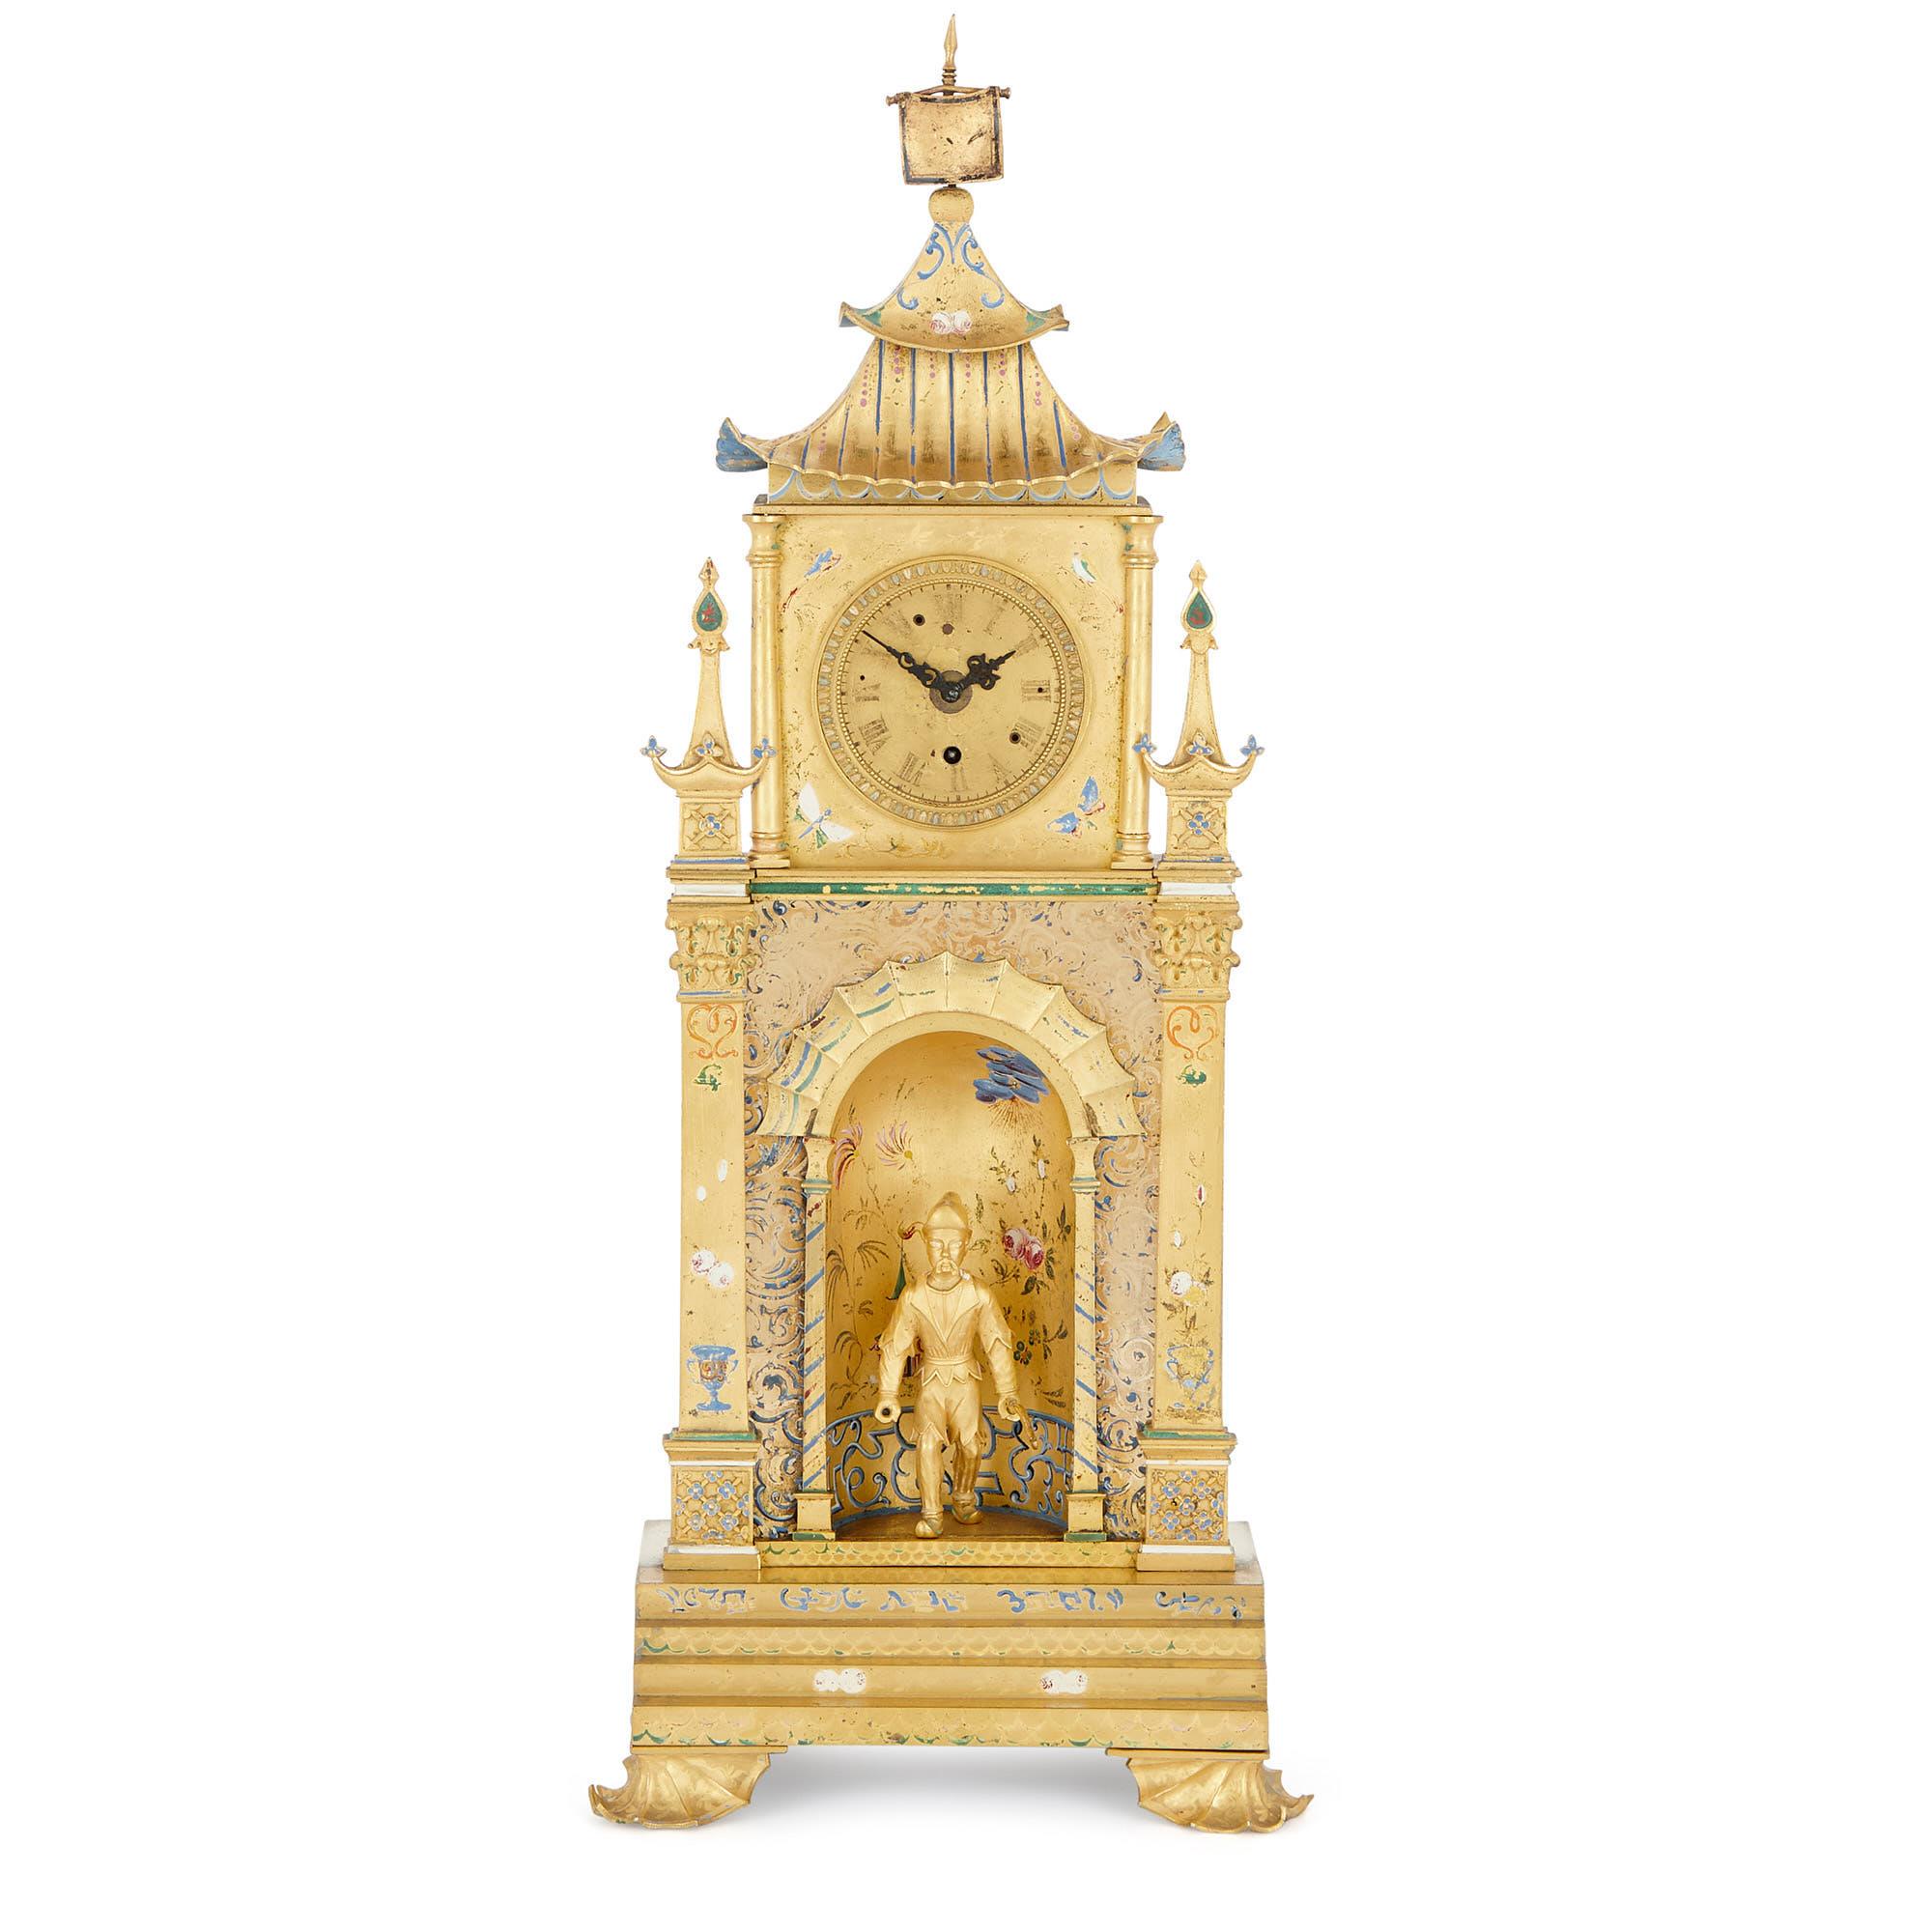 This clock set is designed in a wonderful ‘chinoiserie’ style. This style was inspired by the art of China, and it was very fashionable in Europe in the 18th and 19th centuries. The clock set is comprised of a mantel clock and a pair of candelabra.